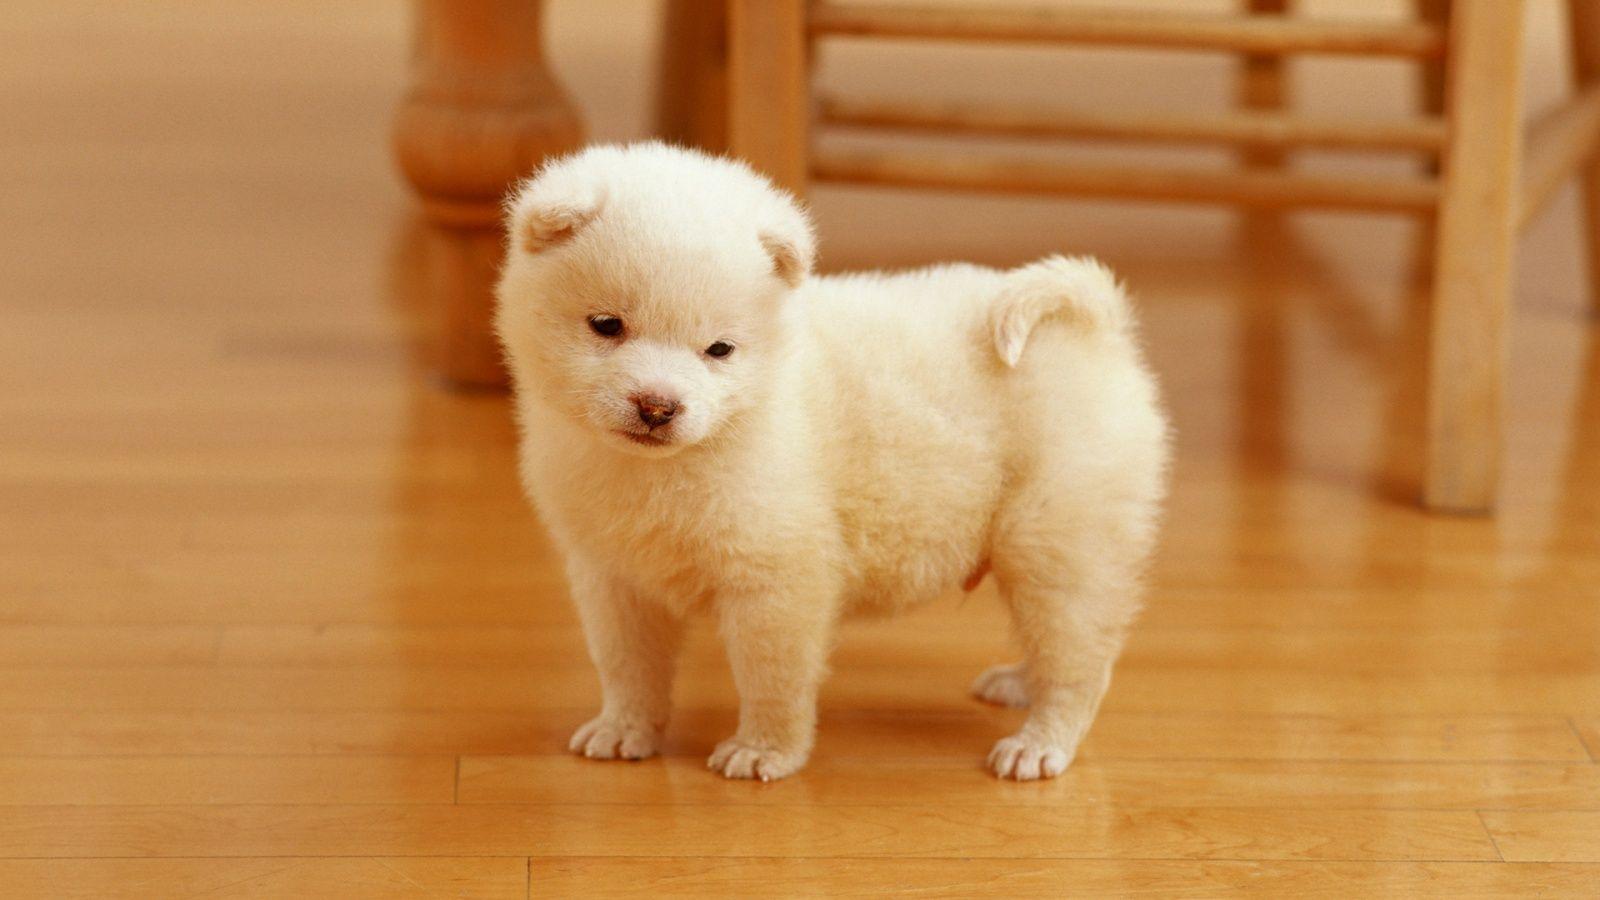 Fluffy Puppy Wallpapers - Top Free Fluffy Puppy Backgrounds